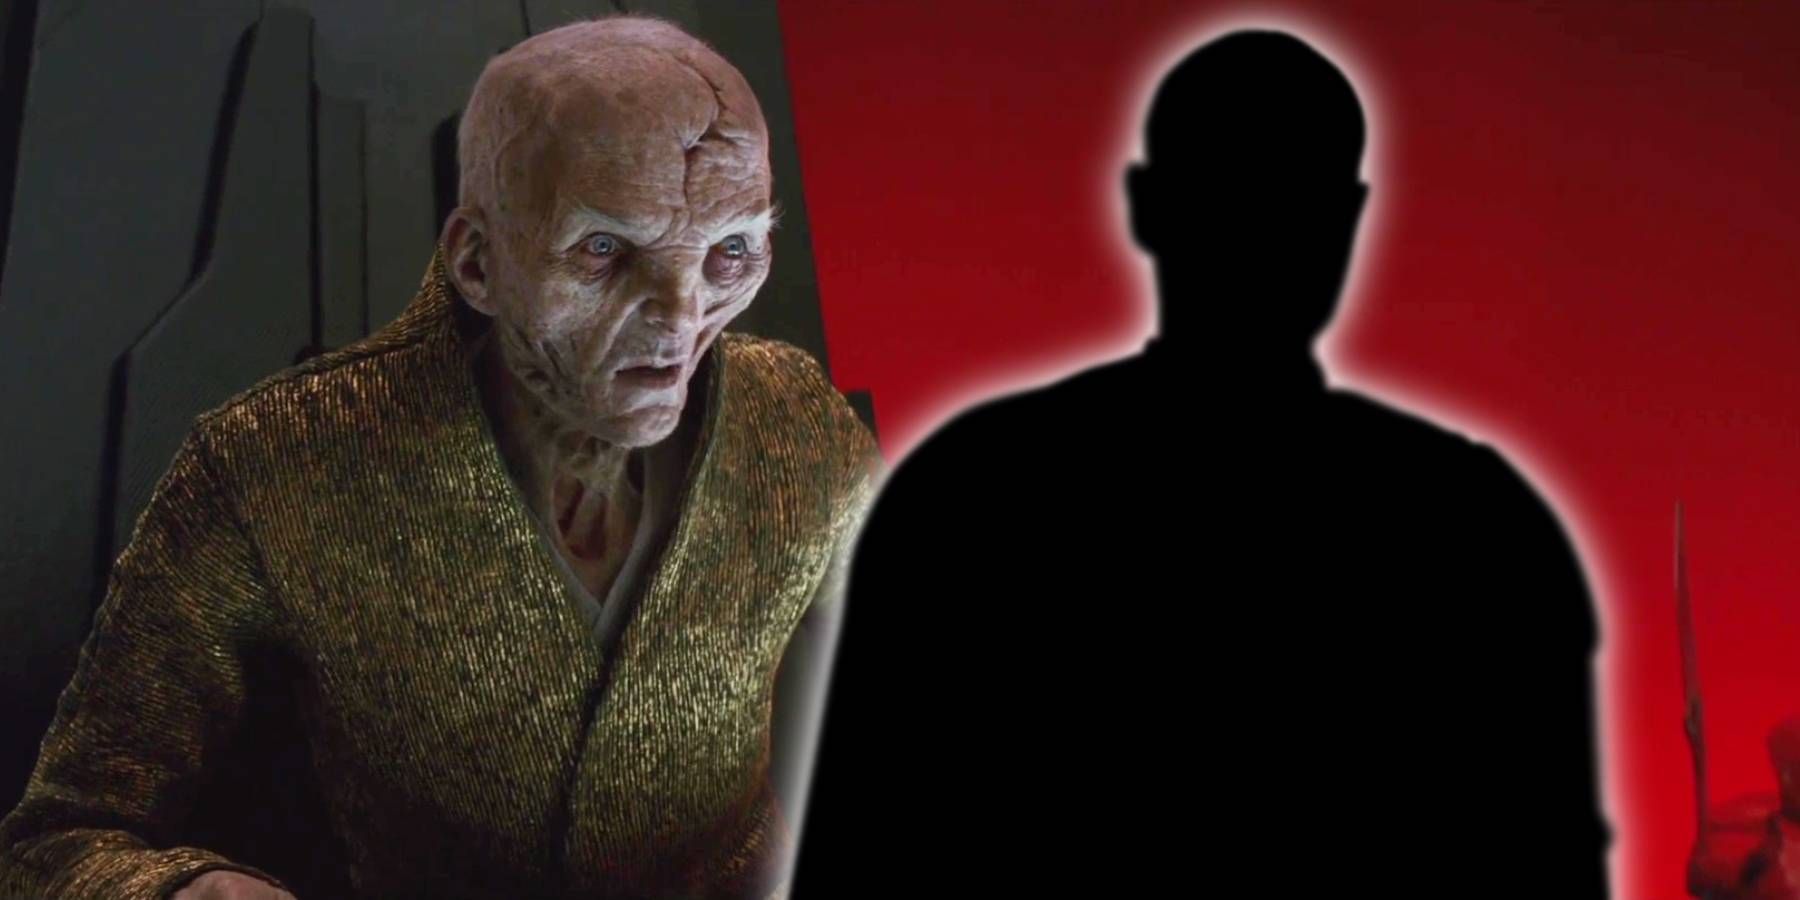 Snoke from Star Wars Episode VIII The Last Jedi with a silhouette of Moff Gideon from The Mandalorian